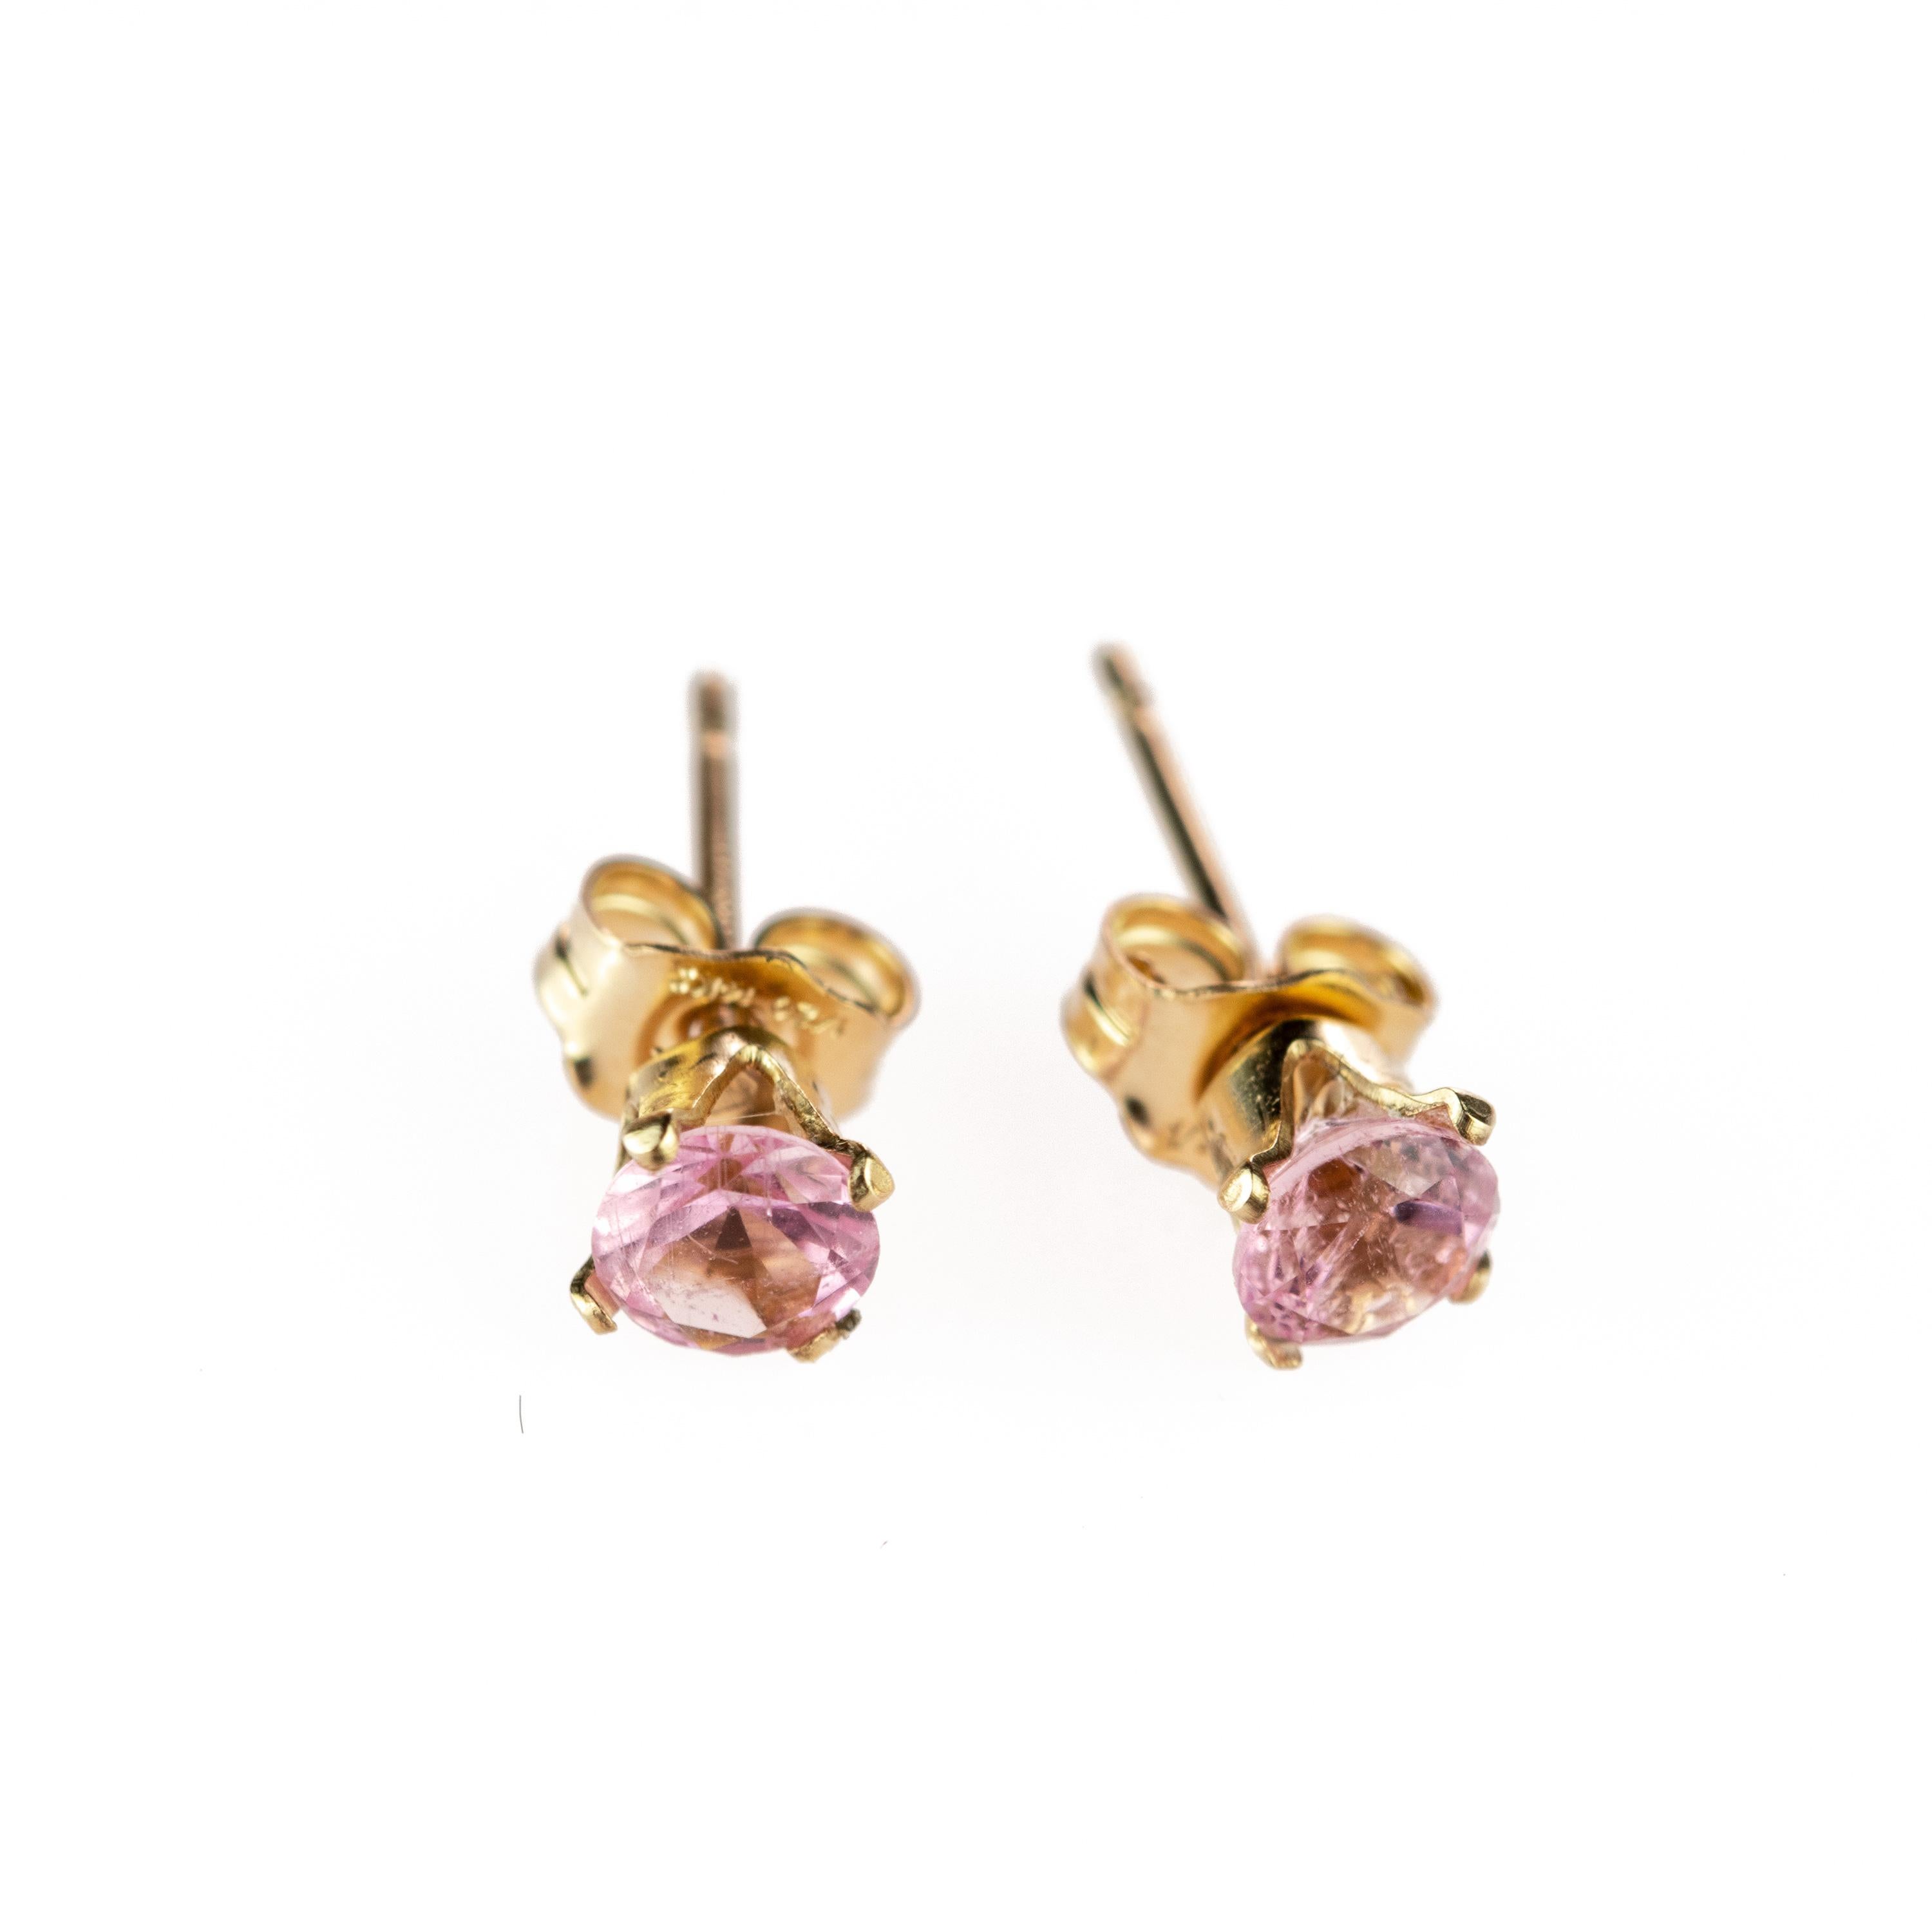 Dainty design with light colours for a fresh summer vibe in a point of light clear design. 0.5 carat pink tourmaline brilliant cut gemstones embellished with 14 karat yellow gold filled details inspired in the beautifulness of the firts tulips